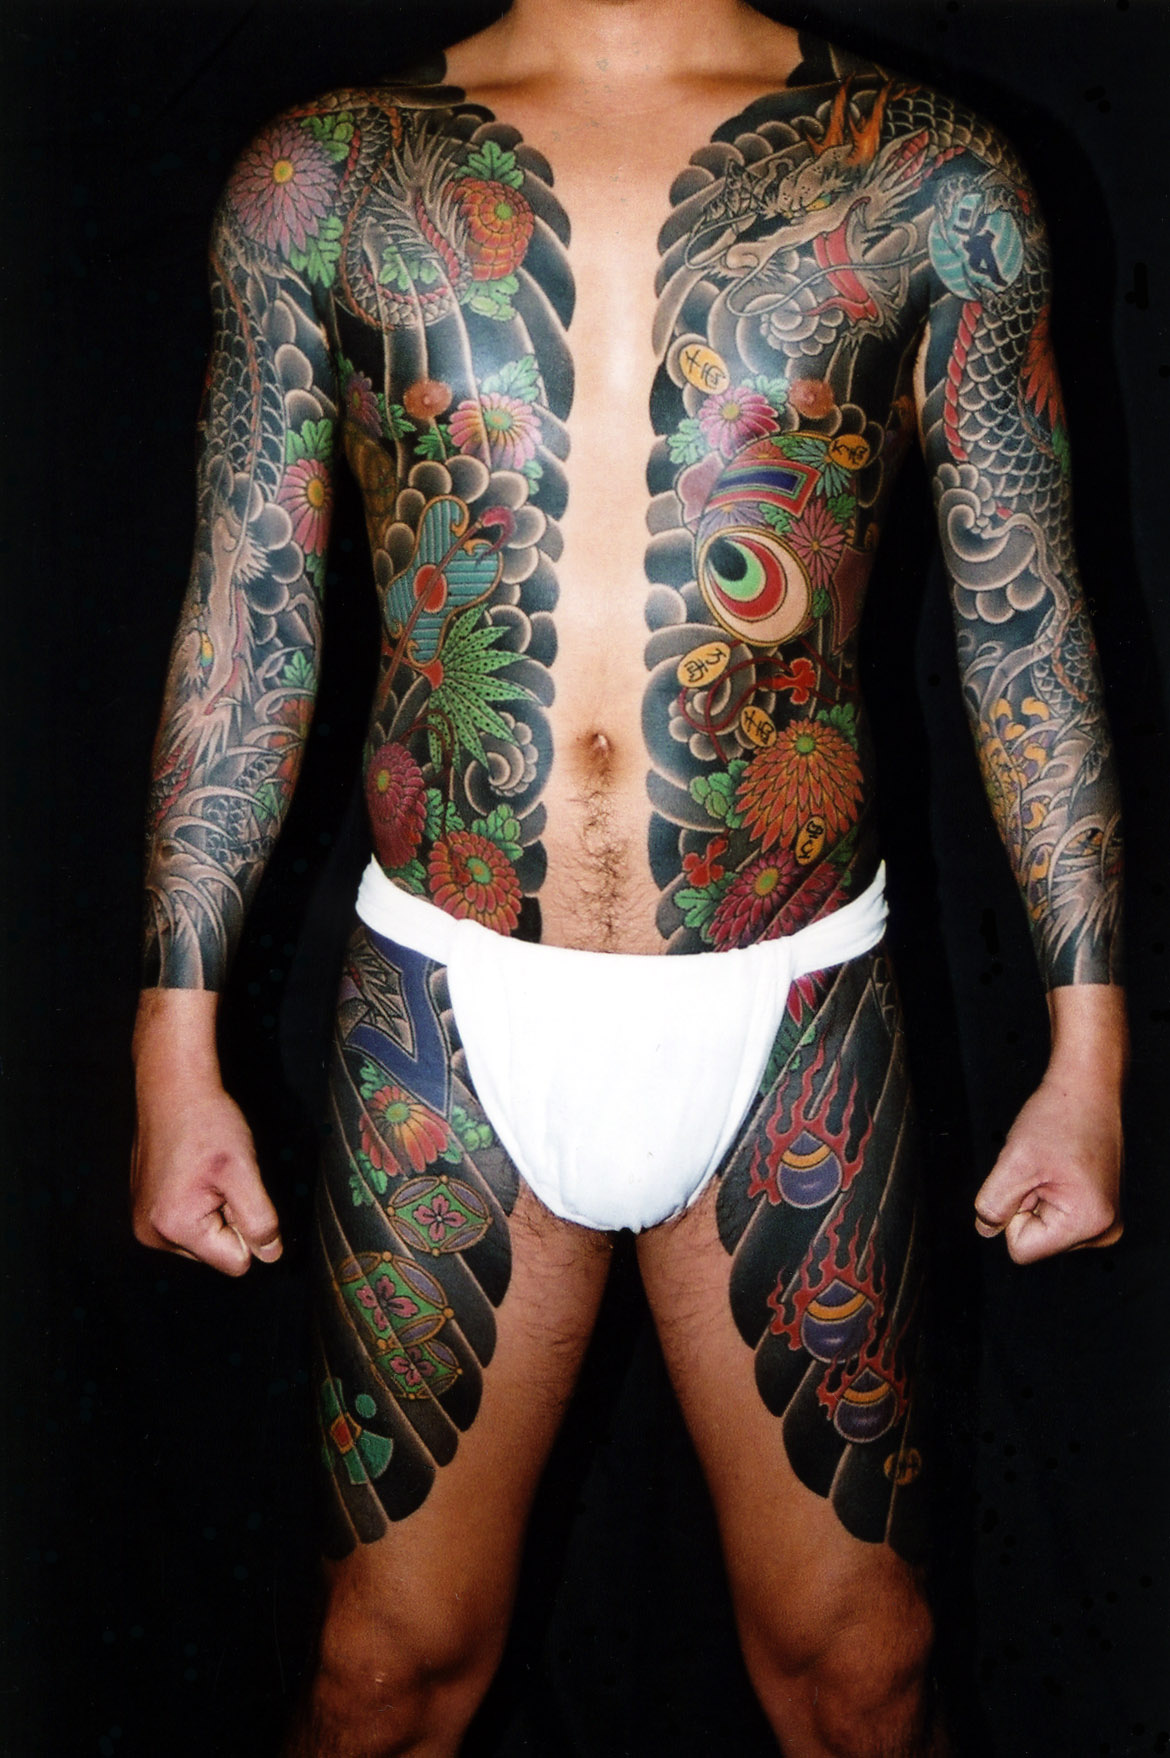 17 Facts You Probably Didn’t Know About Tattoos In Japan  tsunagu Japan